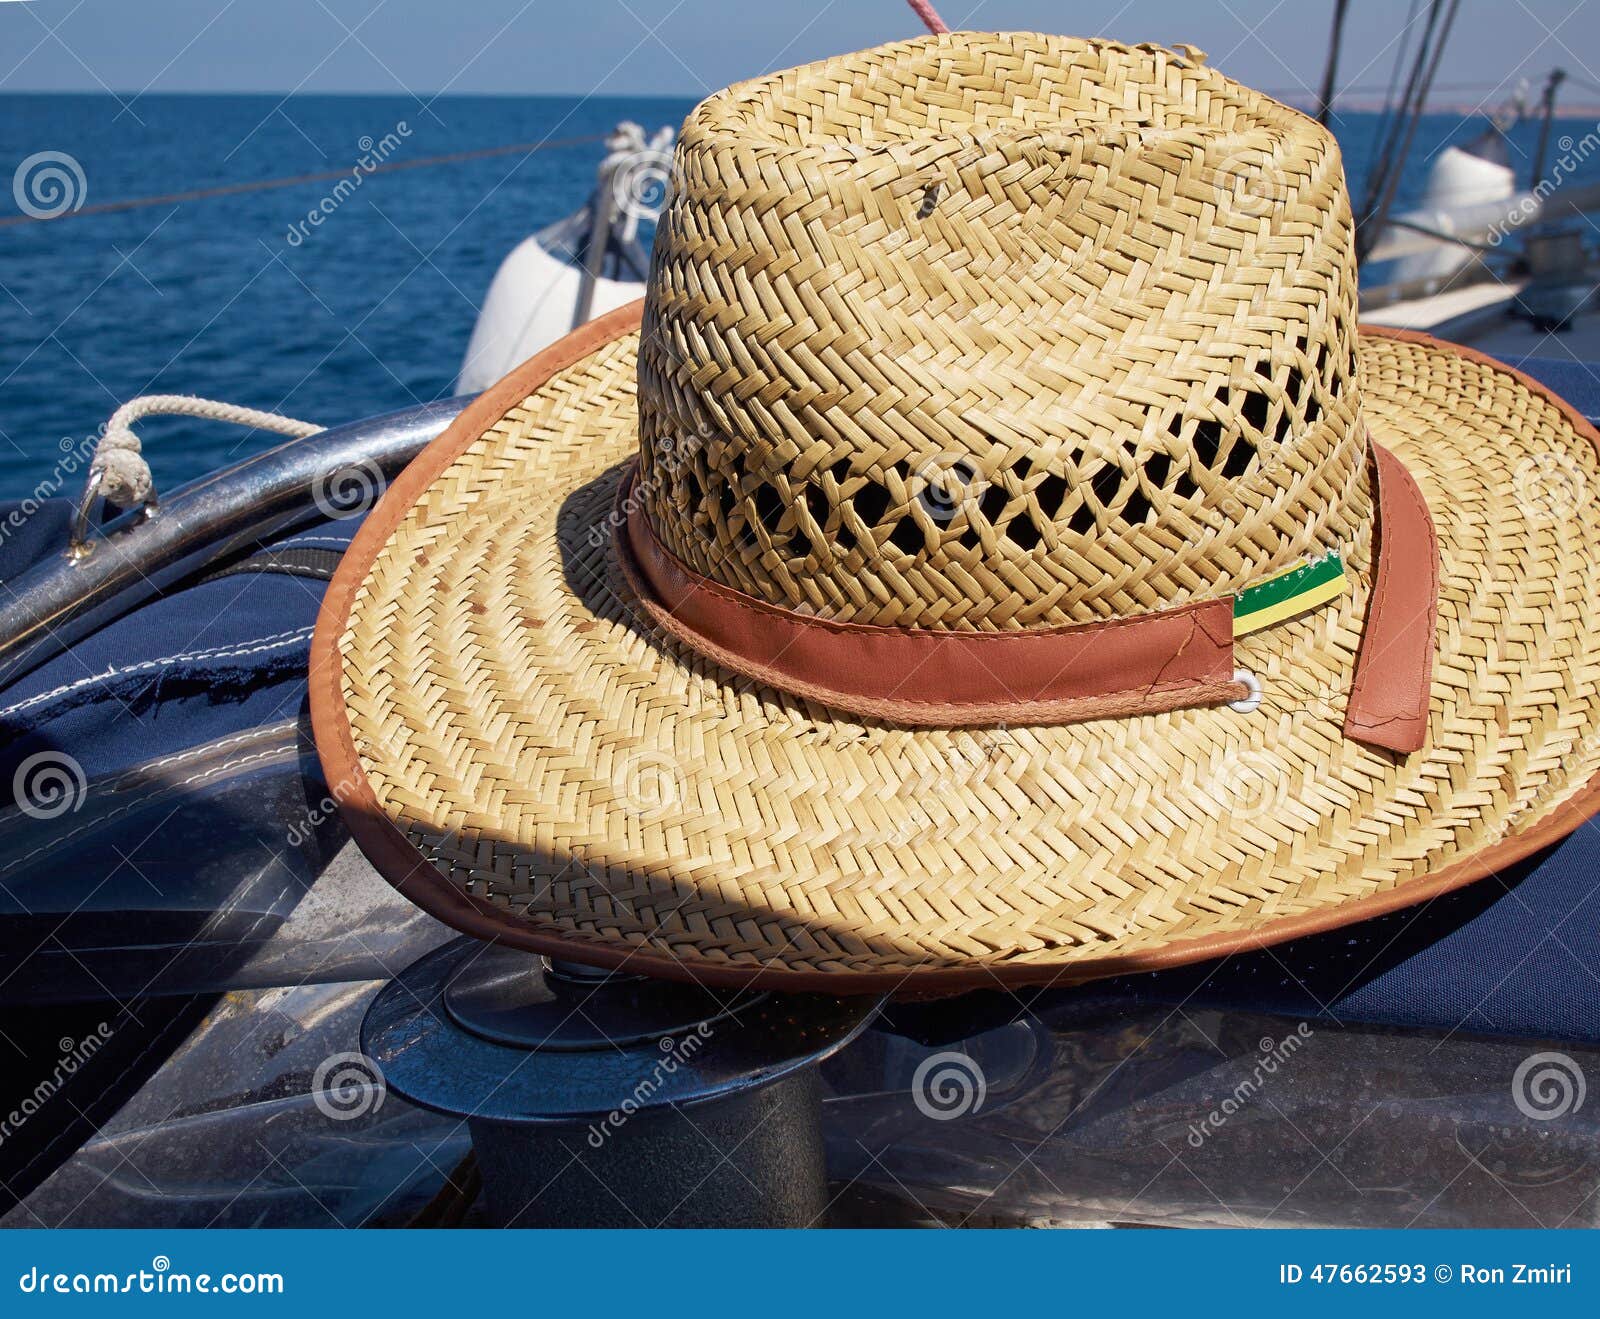 Straw Hat on a Sailing Yacht Stock Image - Image of relax, nautical